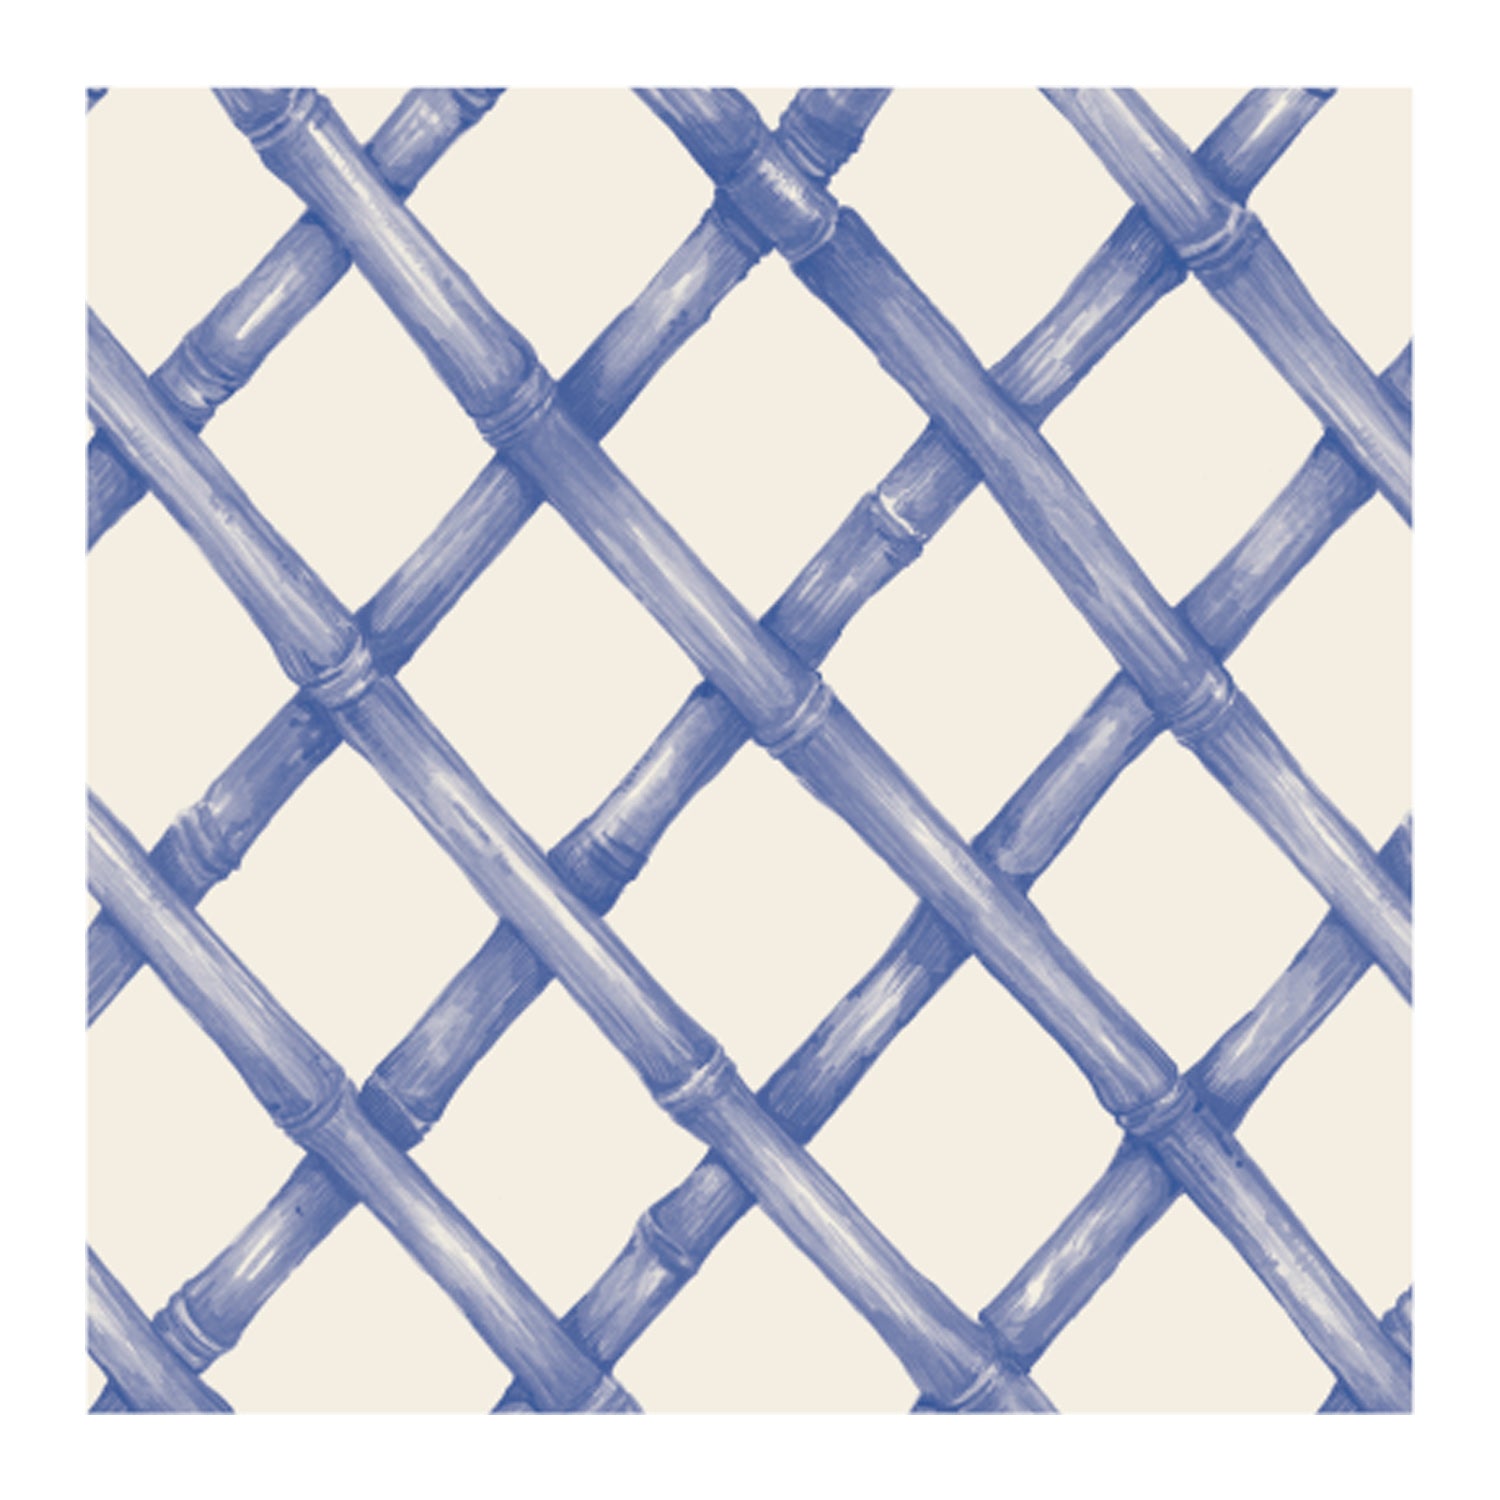 A diagonal woven bamboo pattern in monochrome blue on a white background, on a square cocktail napkin.